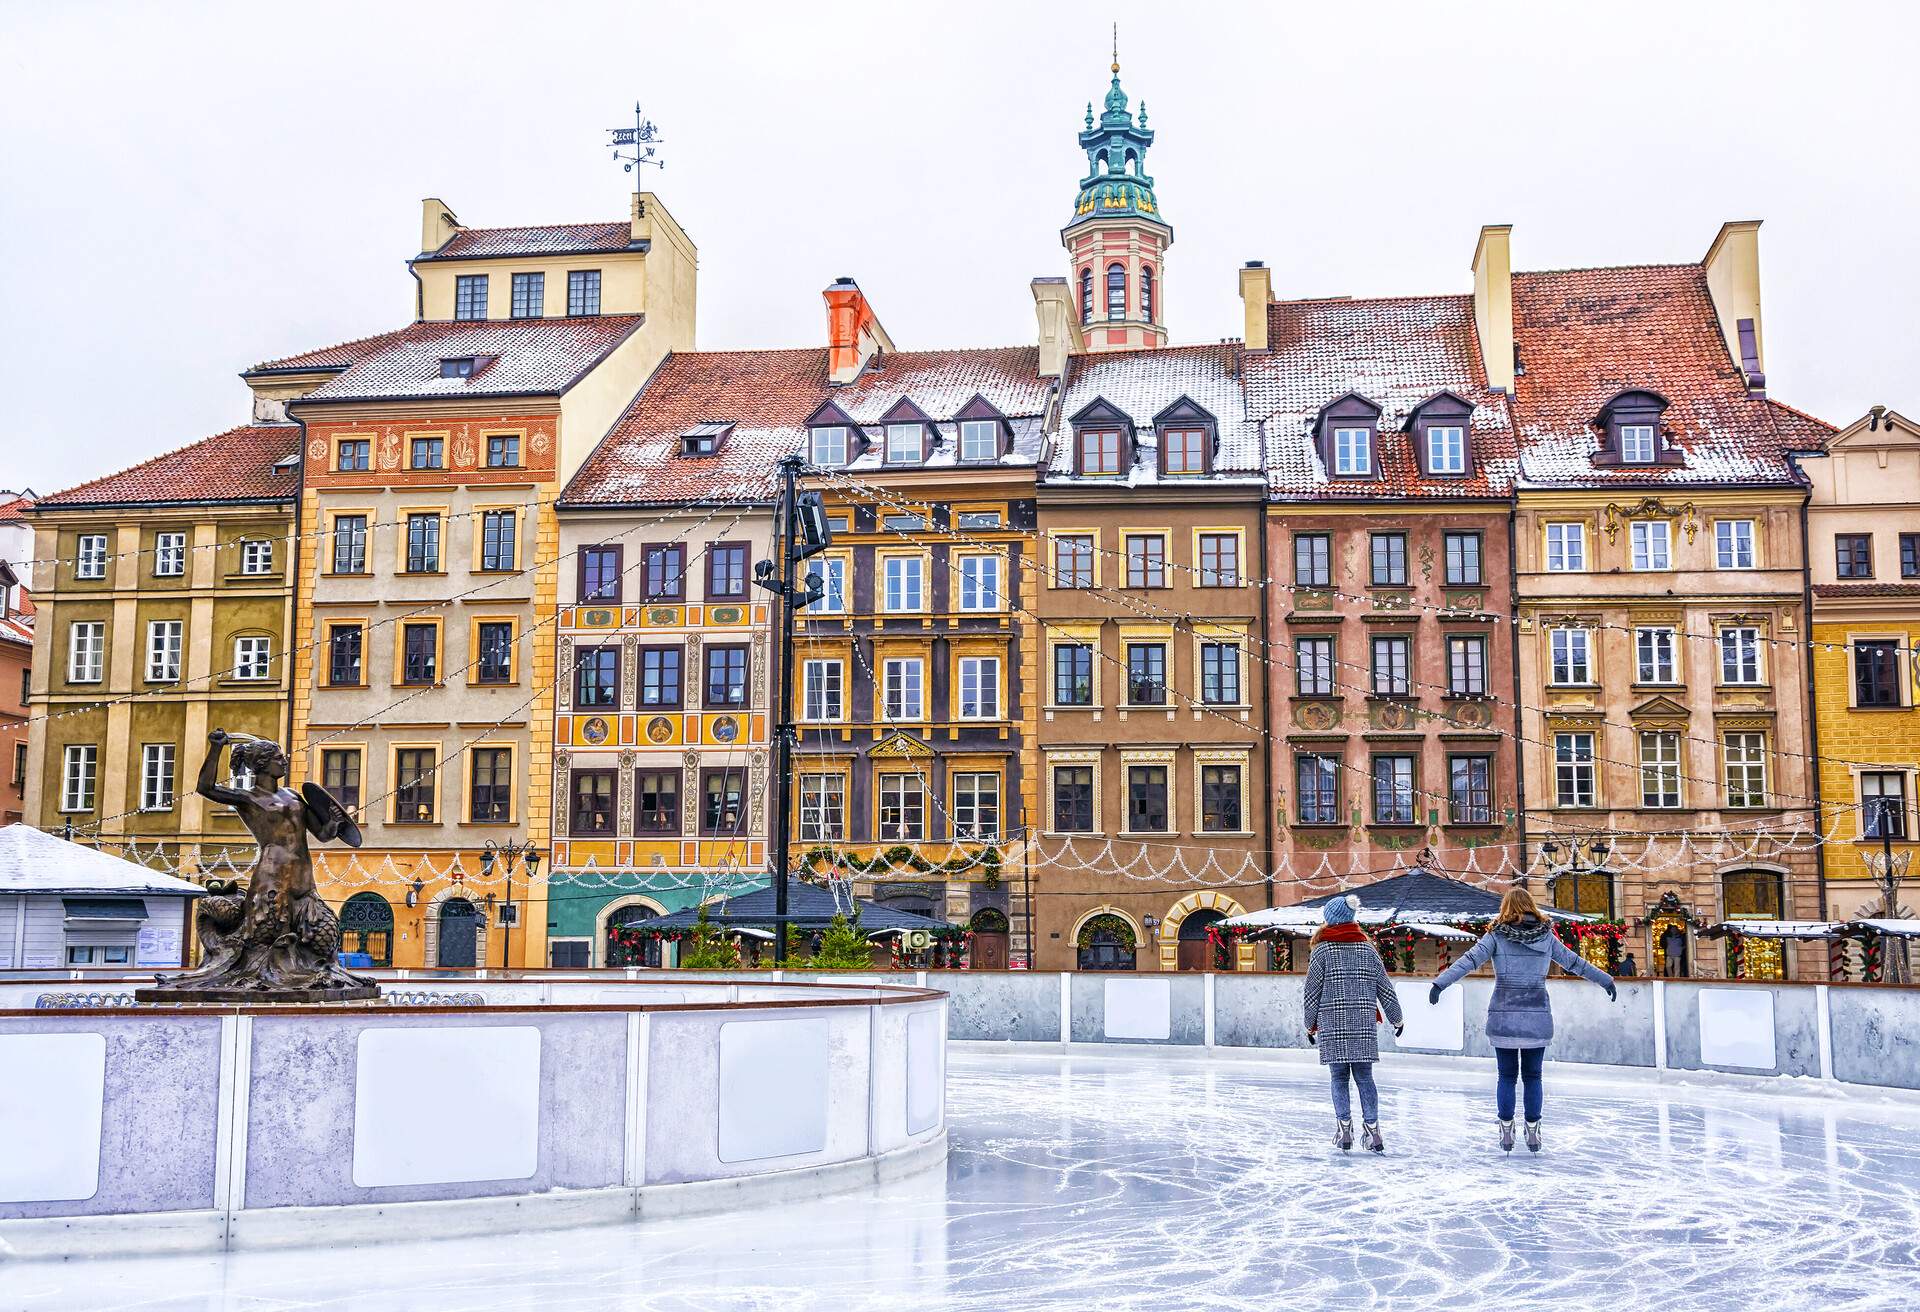 Two girls skate on an ice rink with views of the colourful adjacent Baroque buildings.